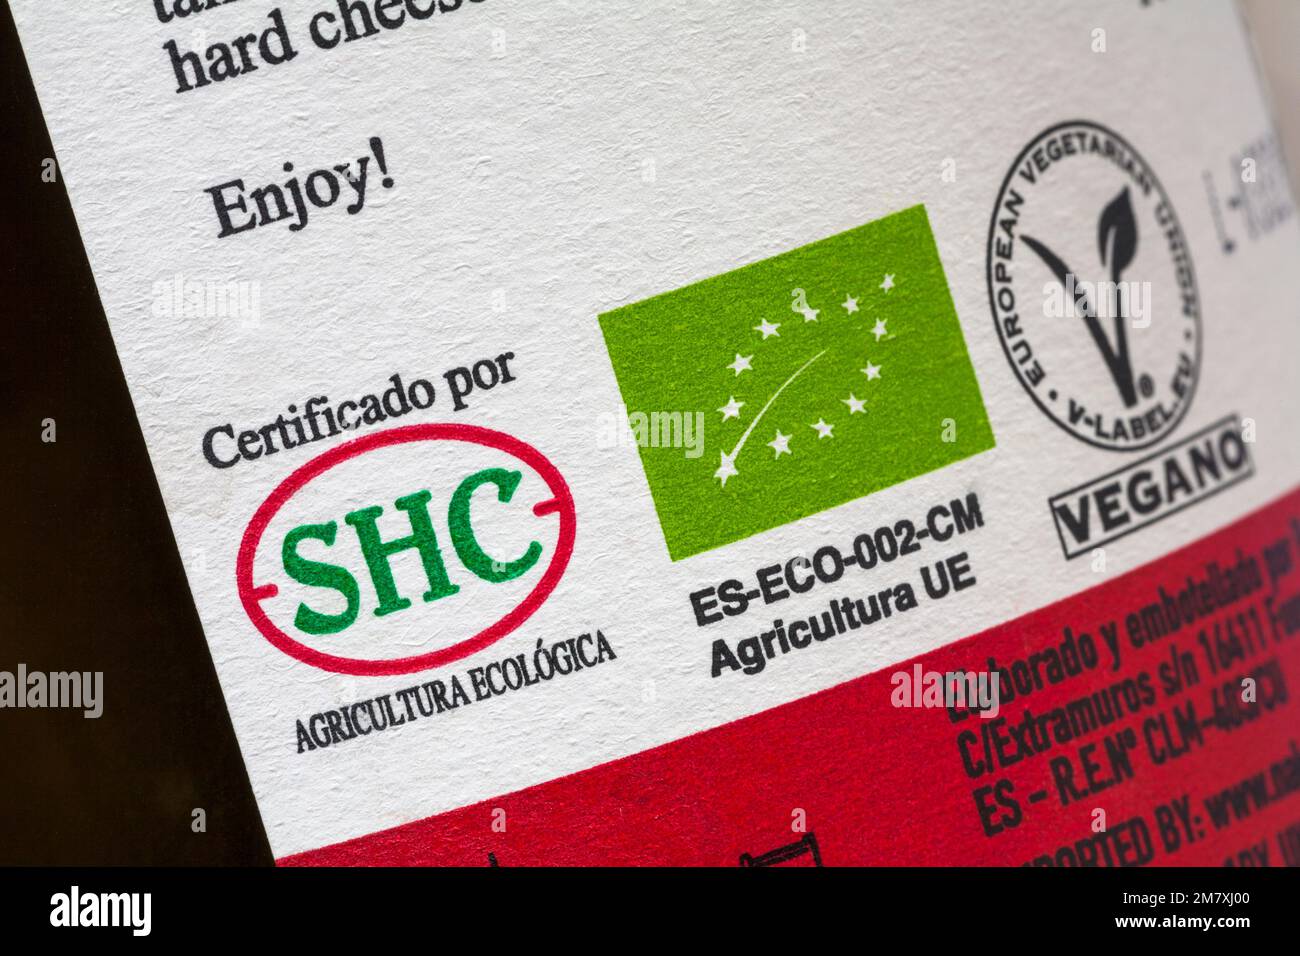 certificado por agricultura ecologica certified organic farming and European Vegetarian Union symbols on bottle of Tomas Buendia red wine Stock Photo